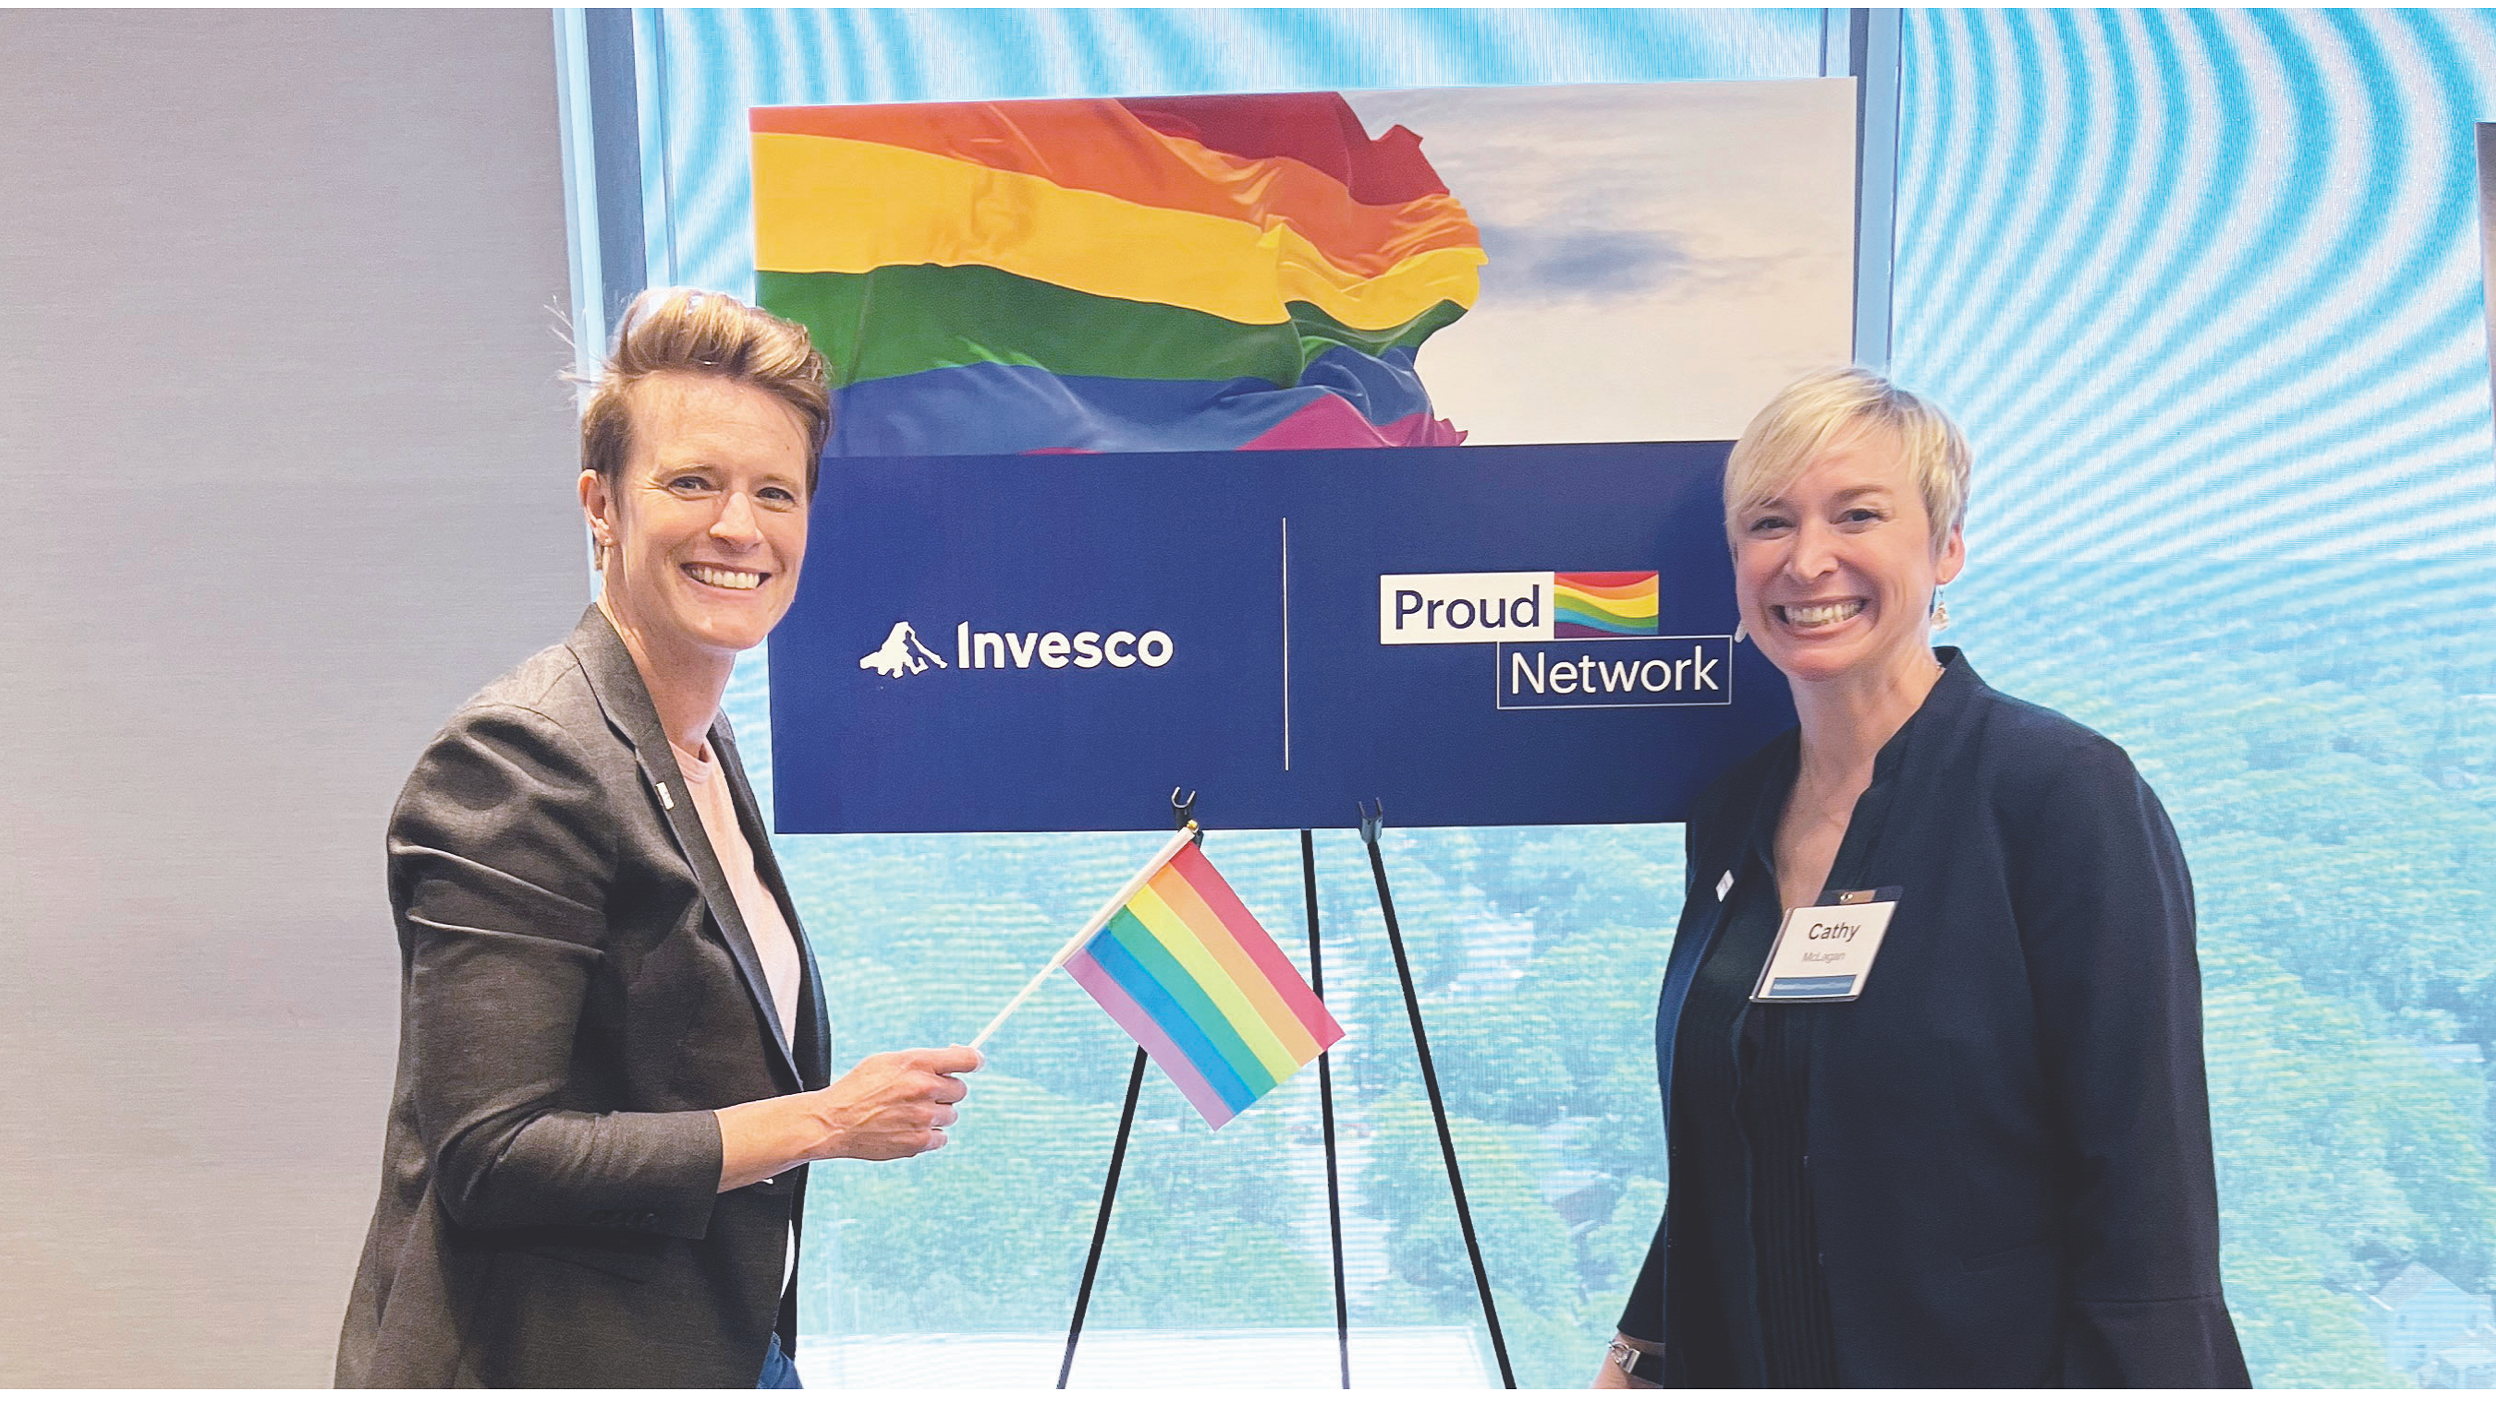 Invesco Proud Network members promoting upcoming LGBTQIA+ events